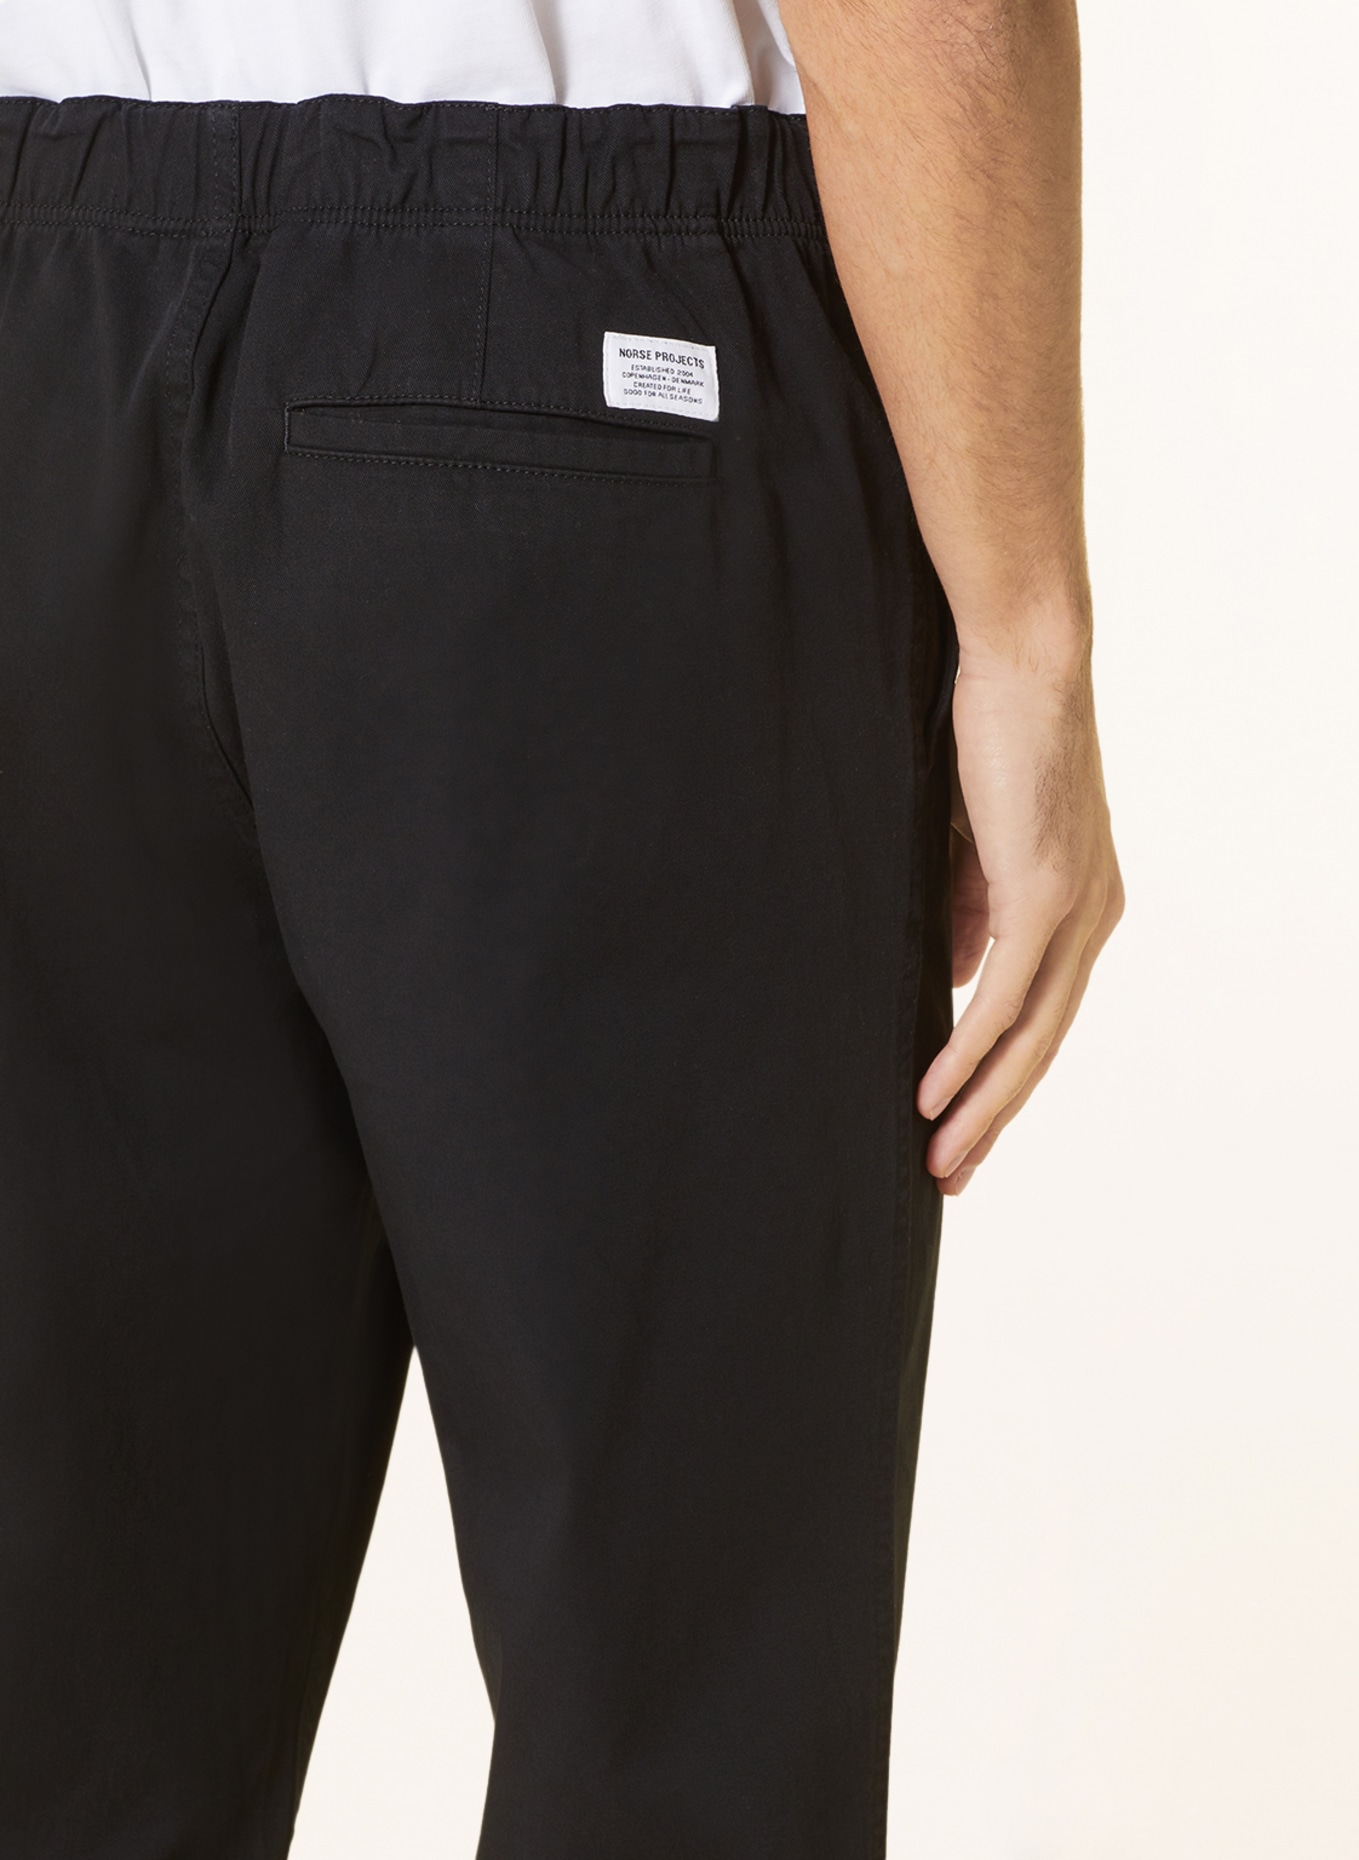 NORSE PROJECTS Hose EZRA Relaxed Fit, Farbe: SCHWARZ (Bild 5)